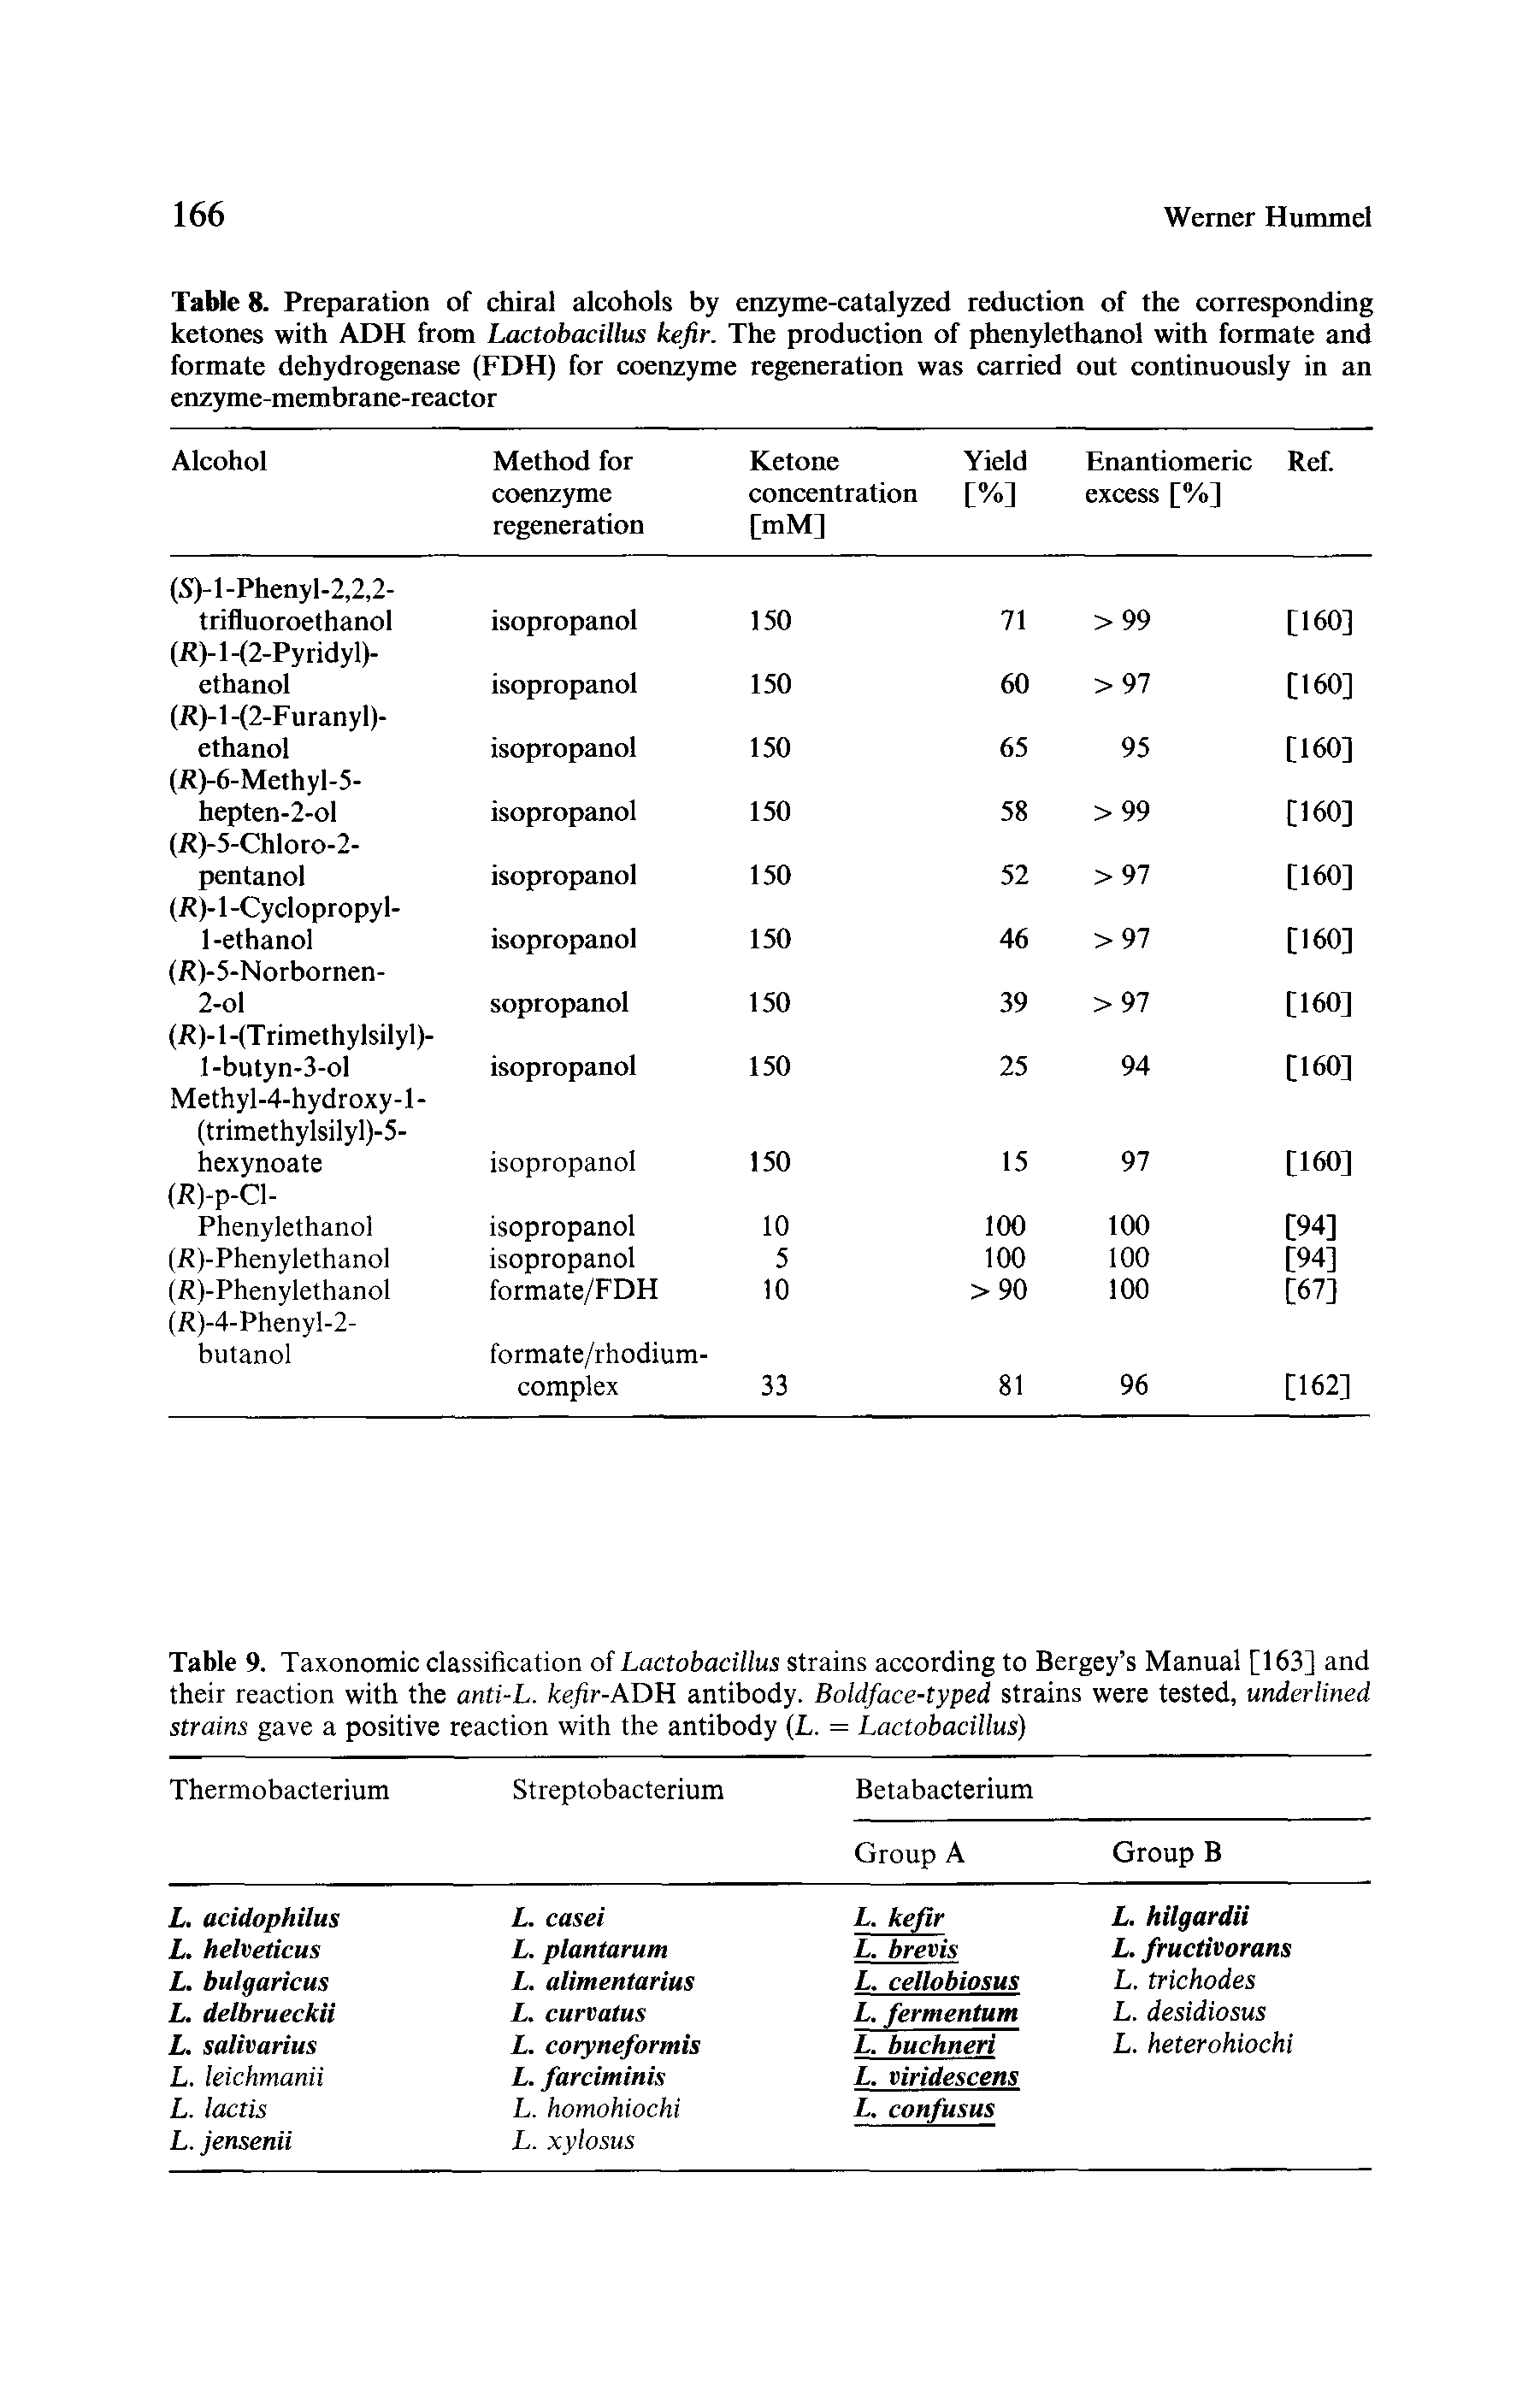 Table 8. Preparation of chiral alcohols by enzyme-catalyzed reduction of the corresponding ketones with ADH from Lactobacillus kefir. The production of phenylethanol with formate and formate dehydrogenase (FDH) for coenzyme regeneration was carried out continuously in an enzyme-membrane-reactor...